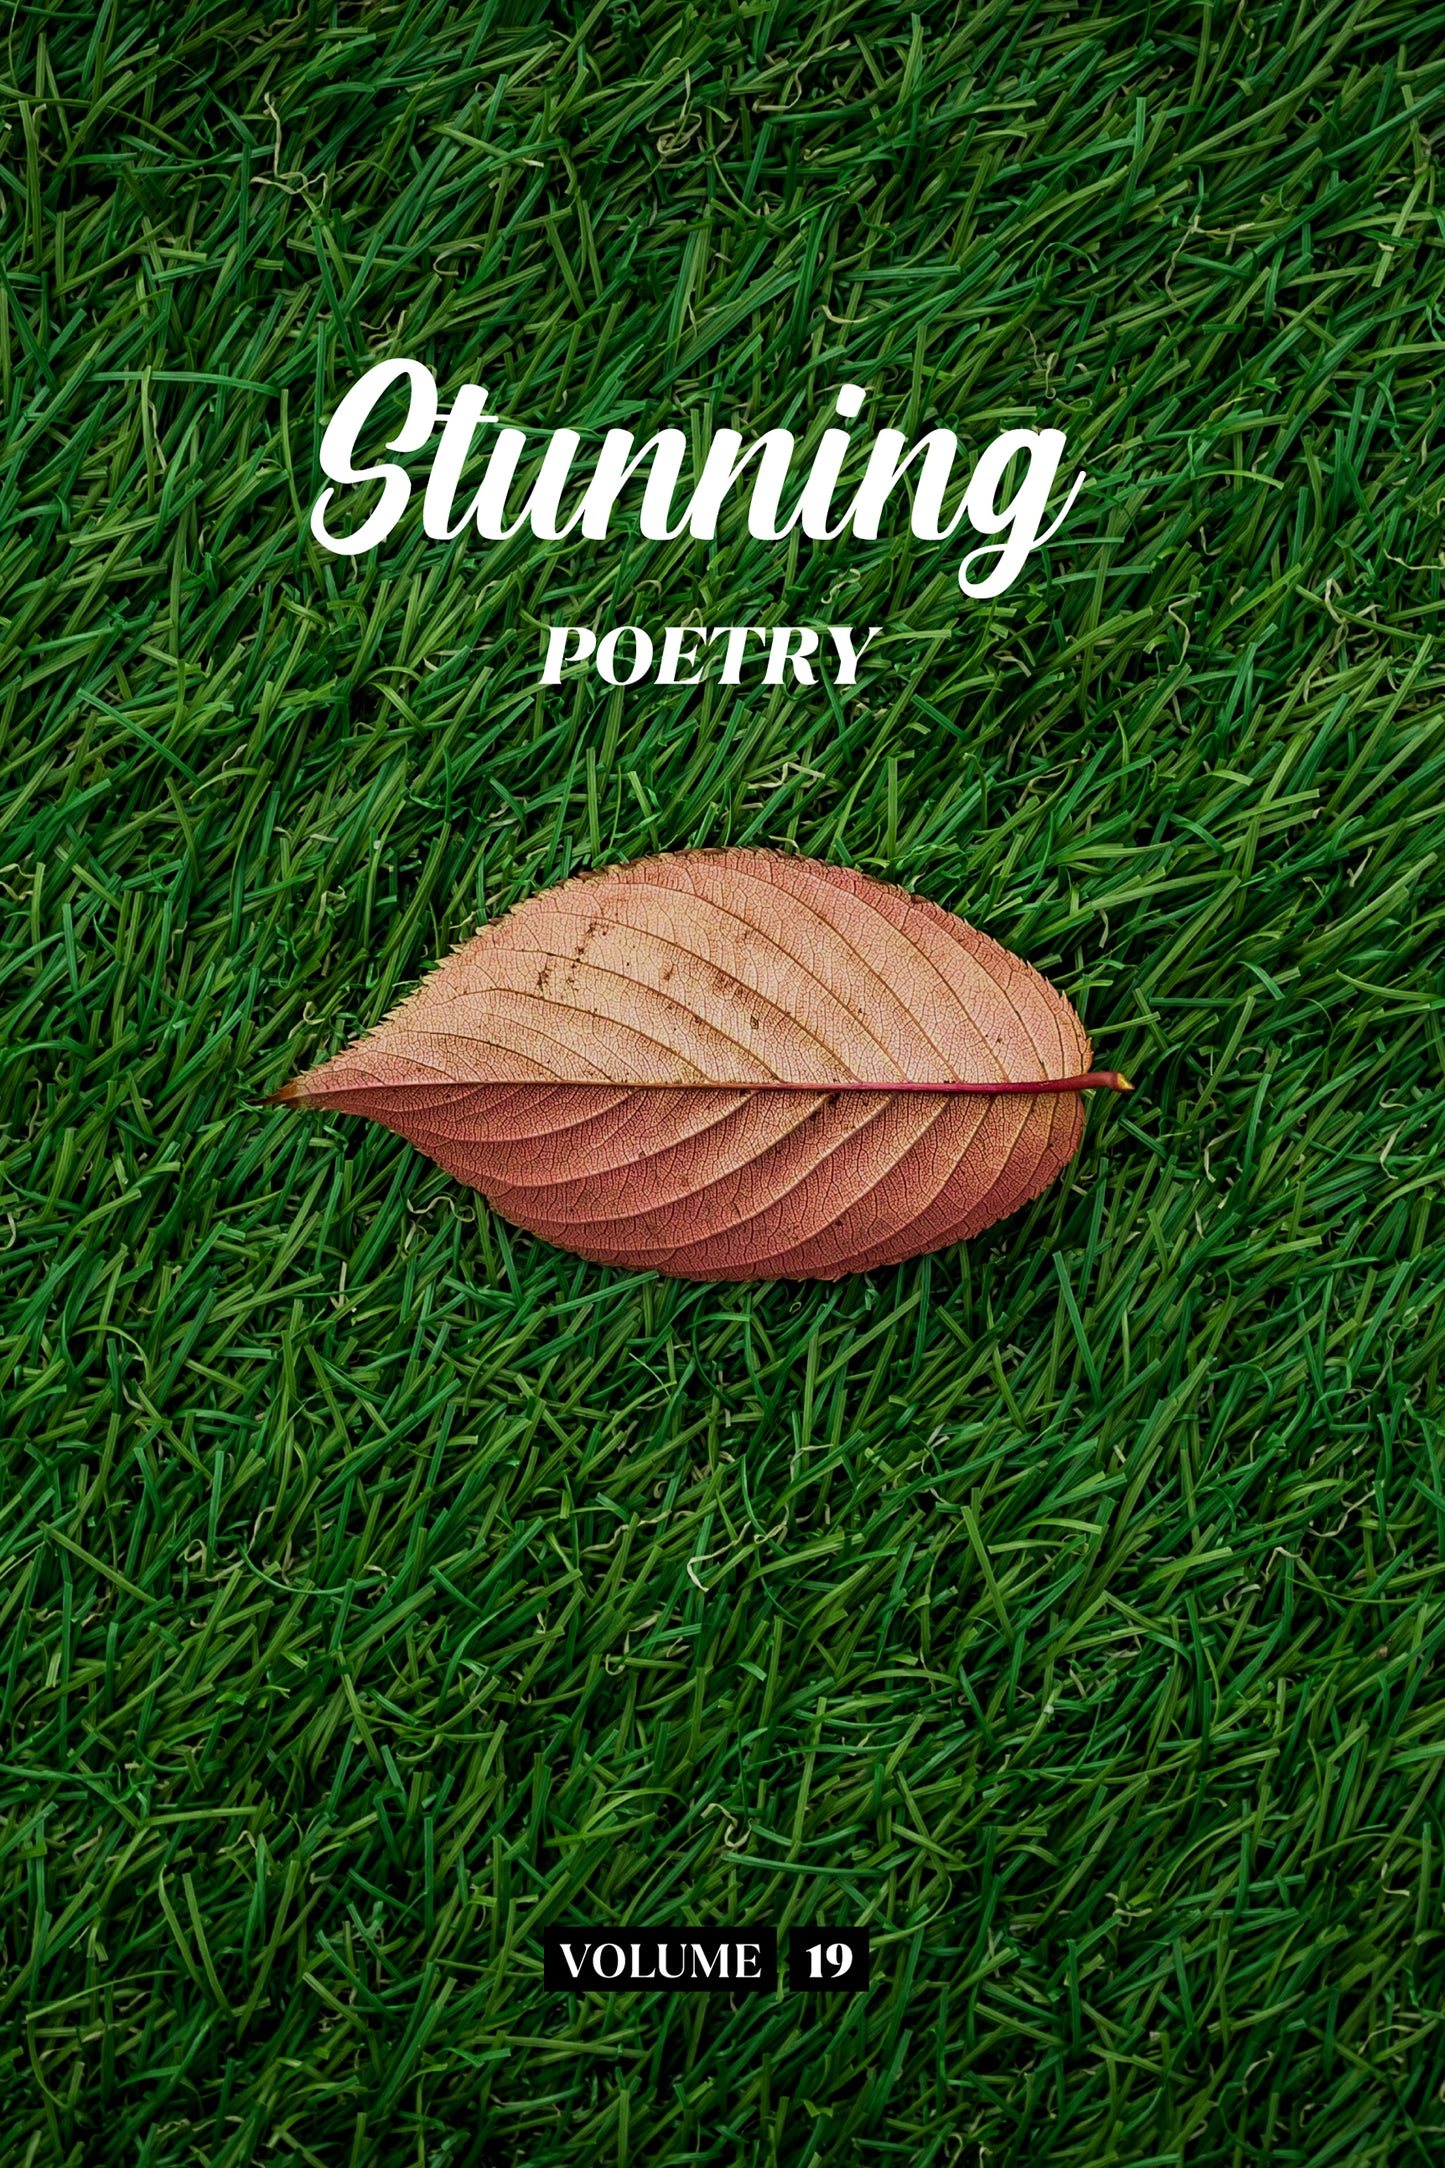 Stunning Poetry (Volume 19) - Physical Book